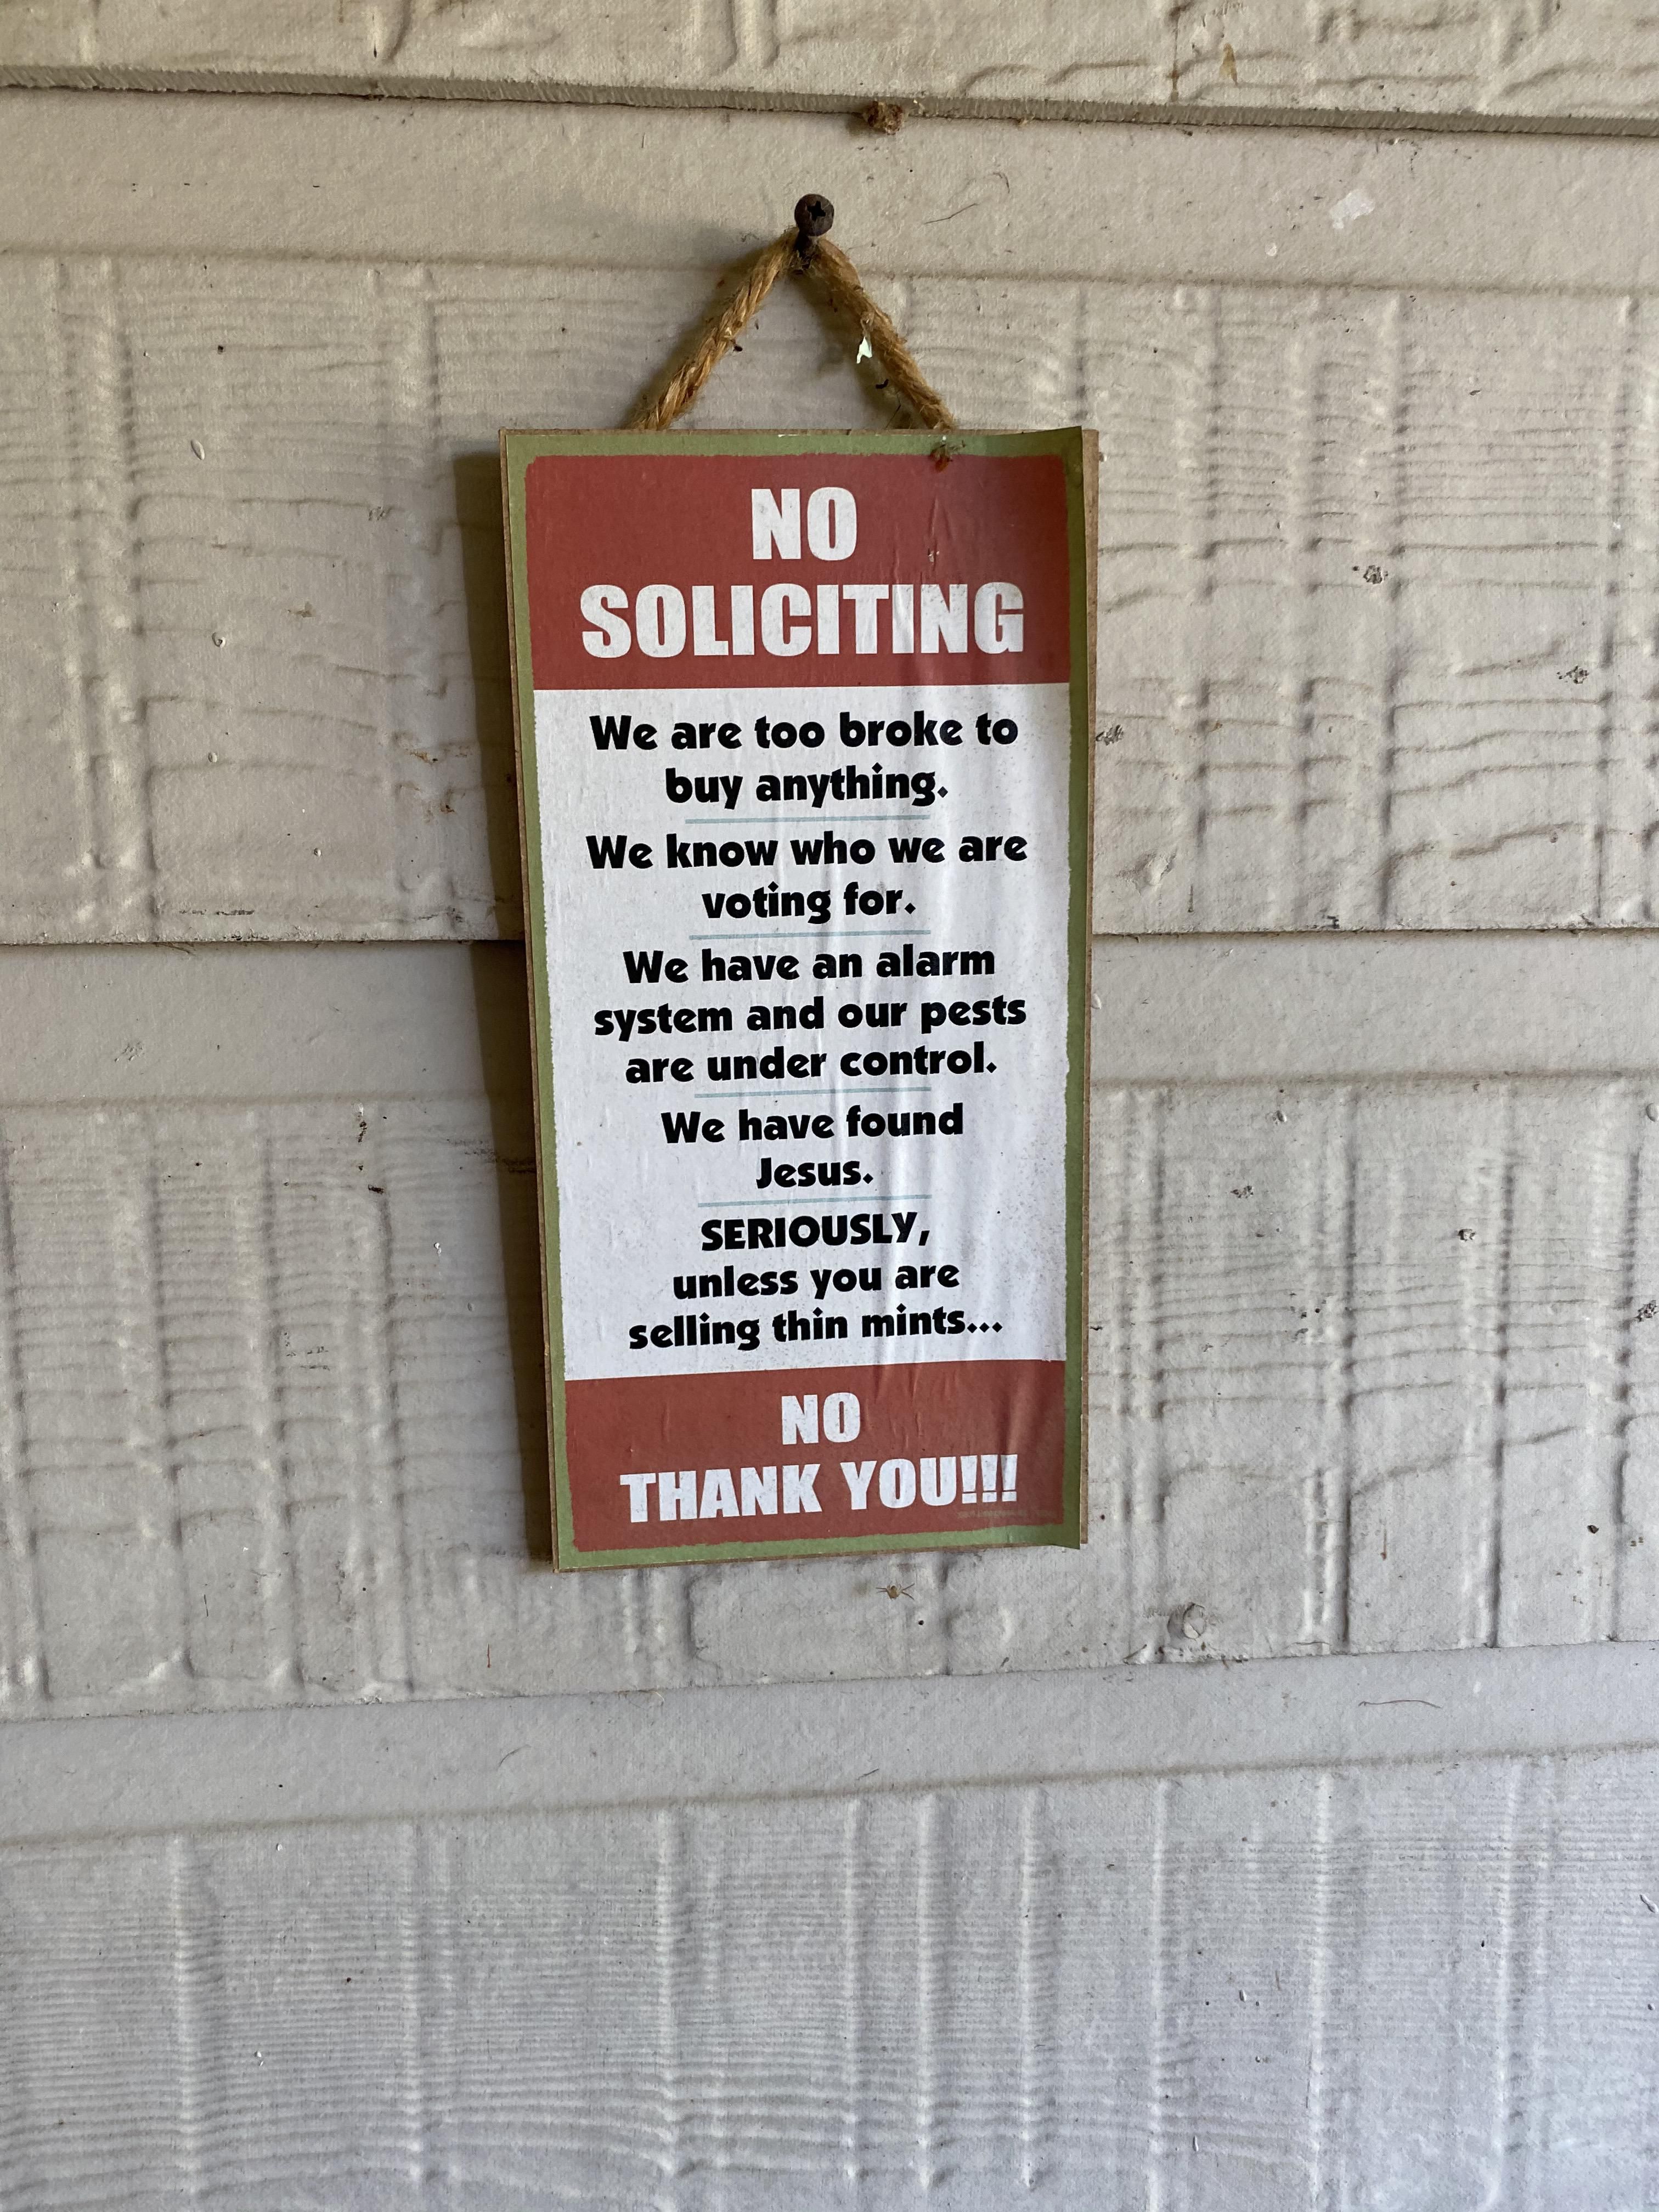 My parents no soliciting sign.